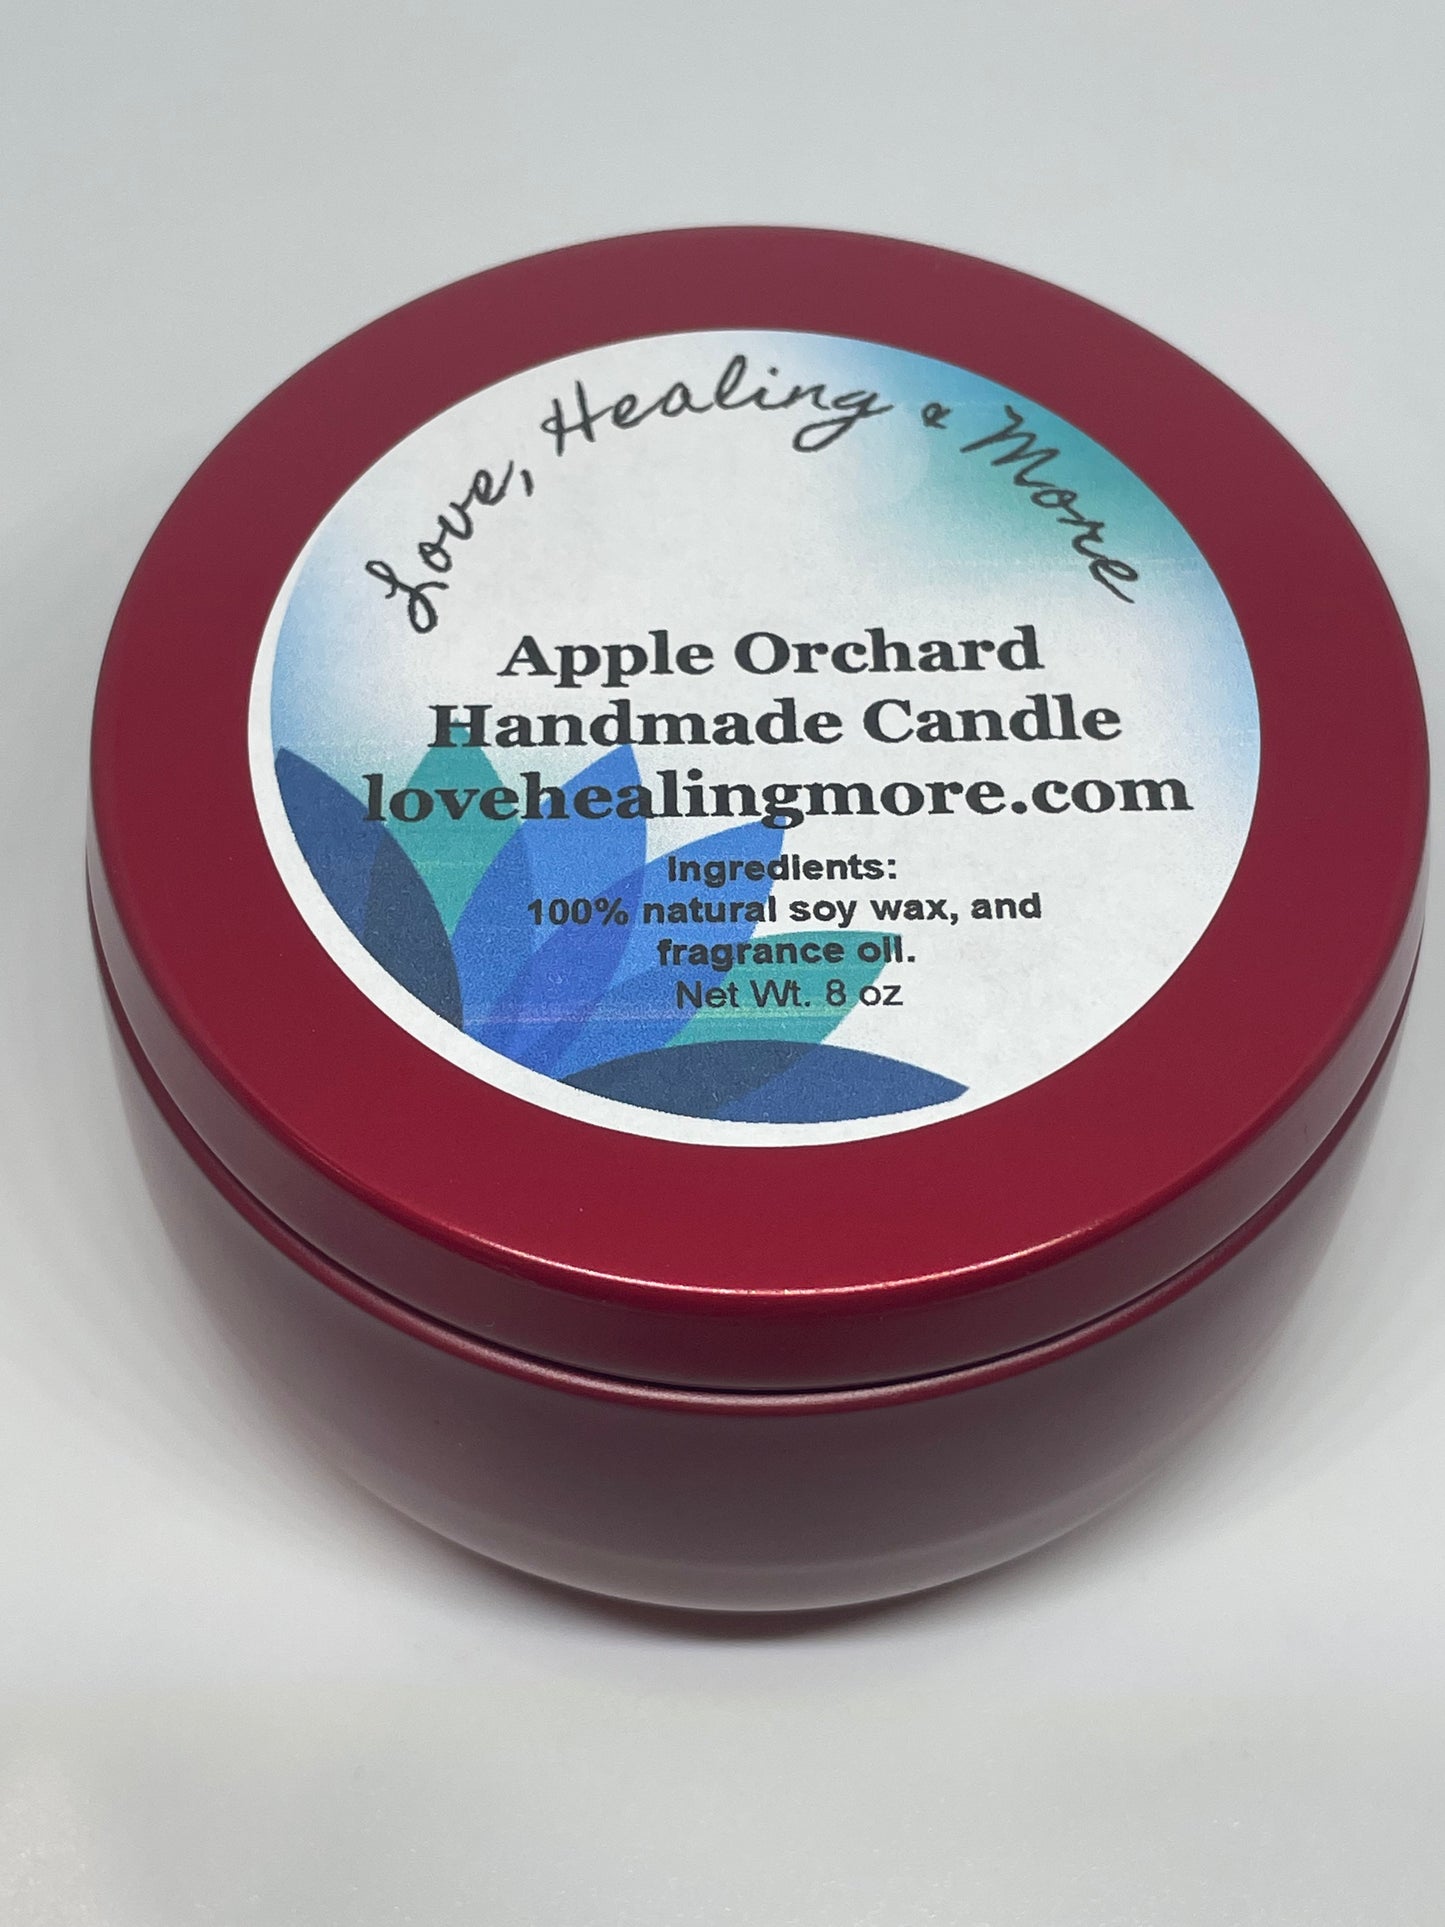 Handmade Apple Orchard Fragrance Candle